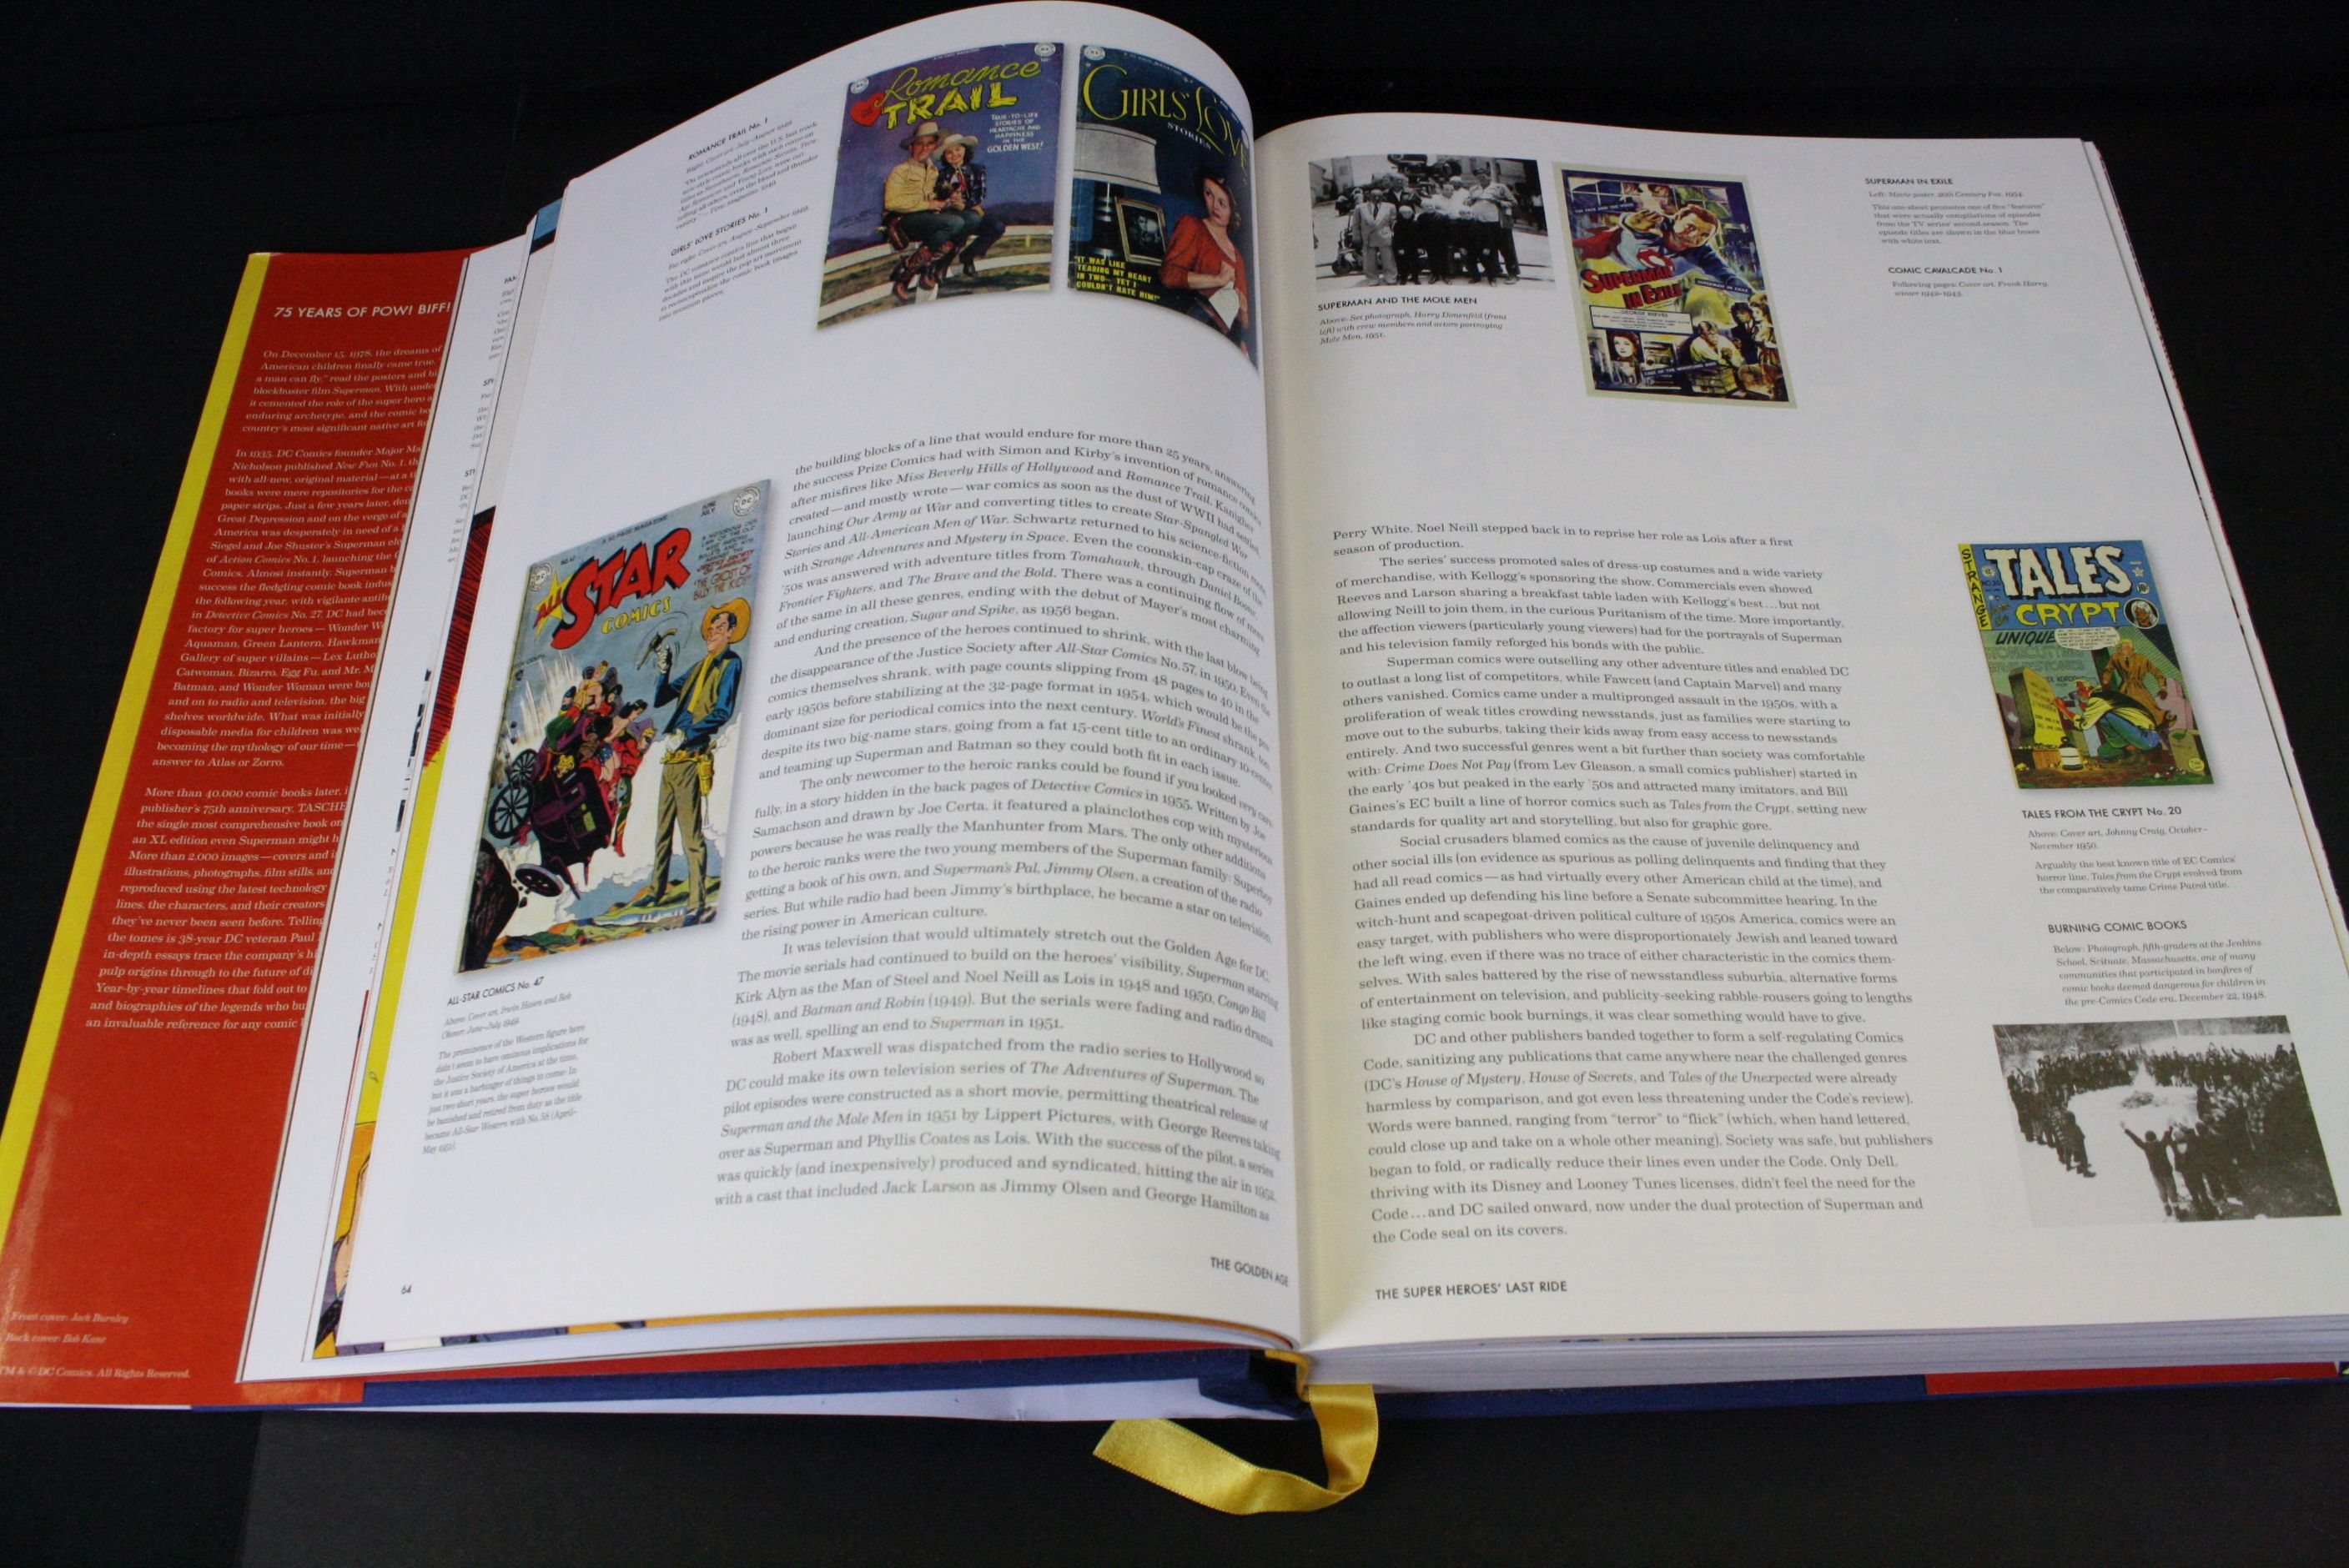 Book - Taschen 75 Years of DC Comics The Art of Modern Mythmaking by Paul Levitz h/b book without - Image 2 of 4